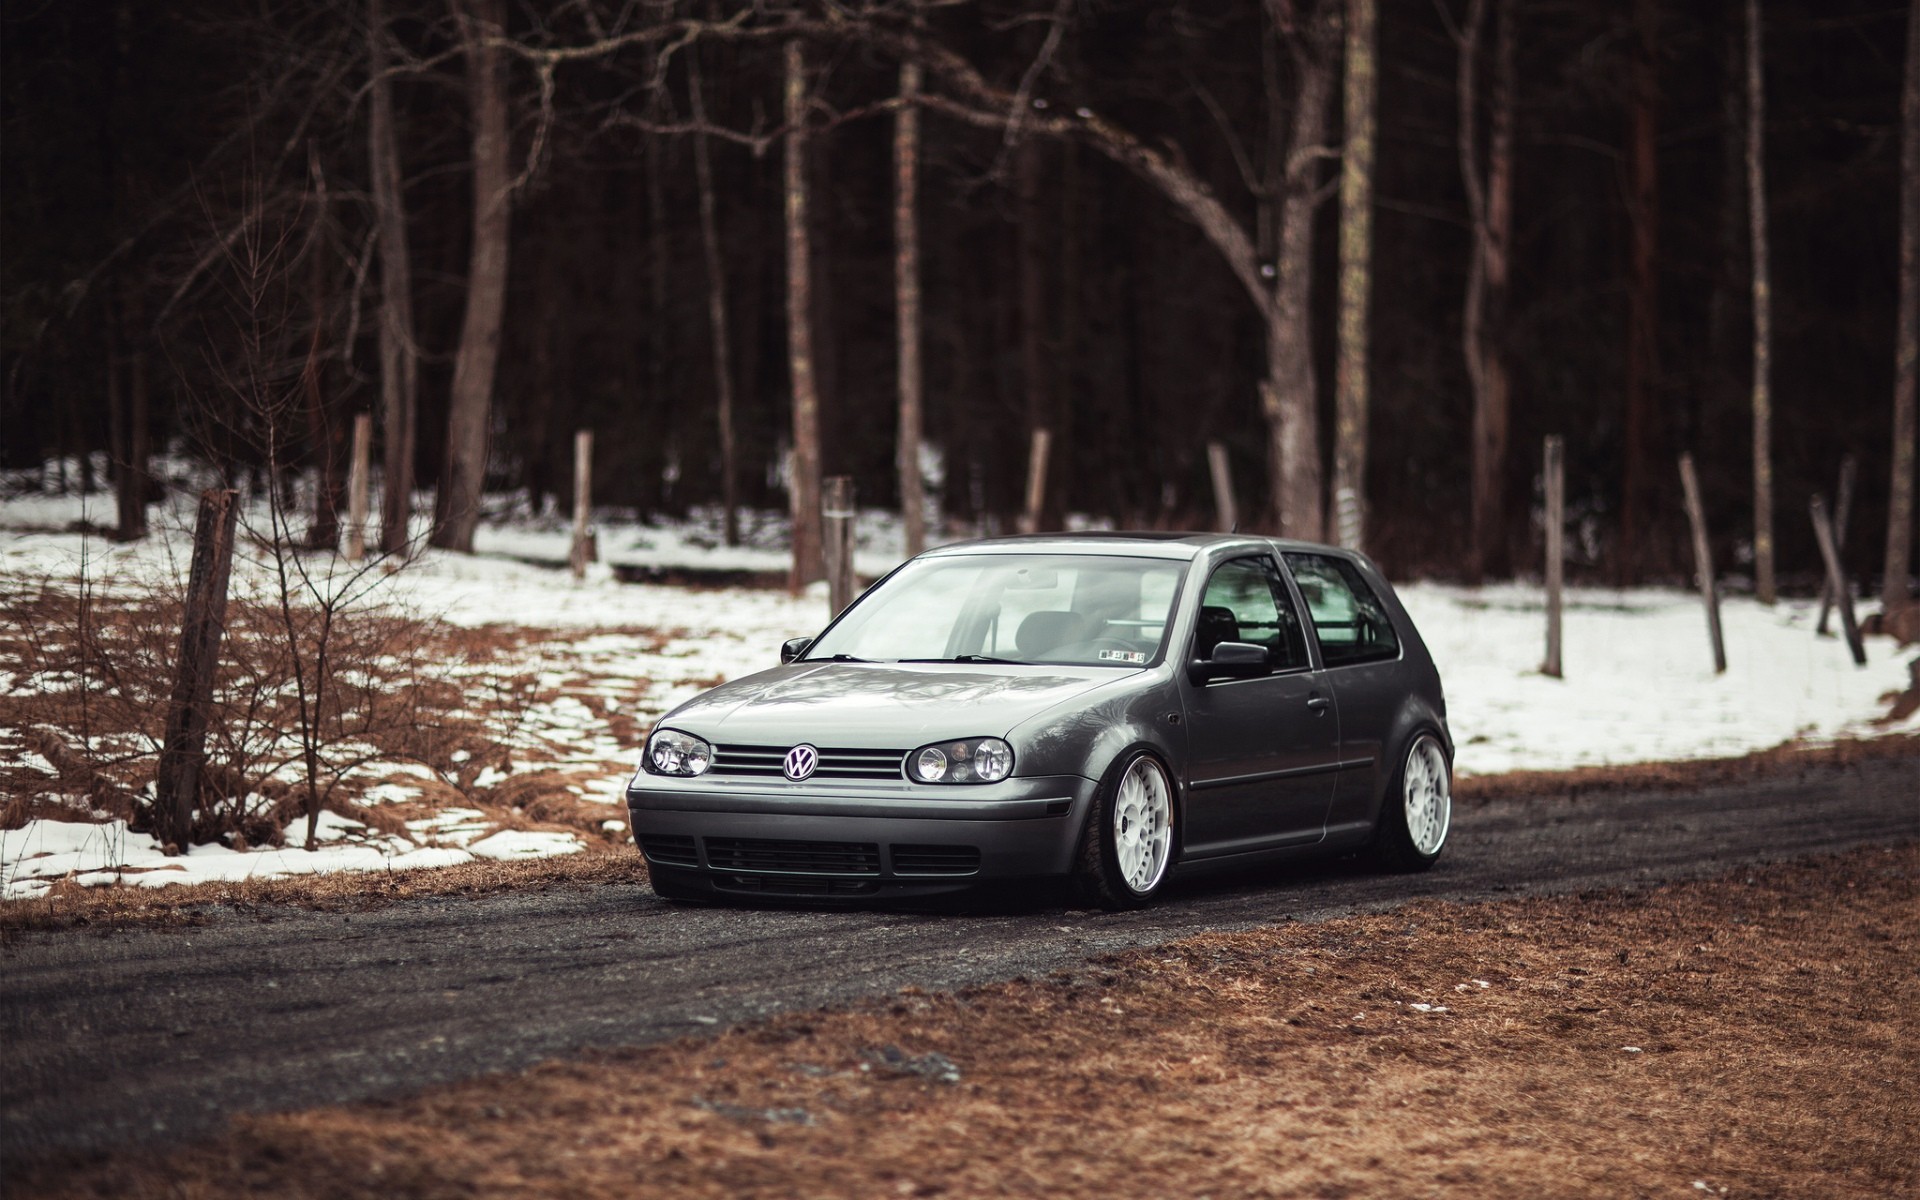 Volkswagen Car Stance Golf IV Volkswagen Golf Colored Wheels Winter Front Angle View 1920x1200